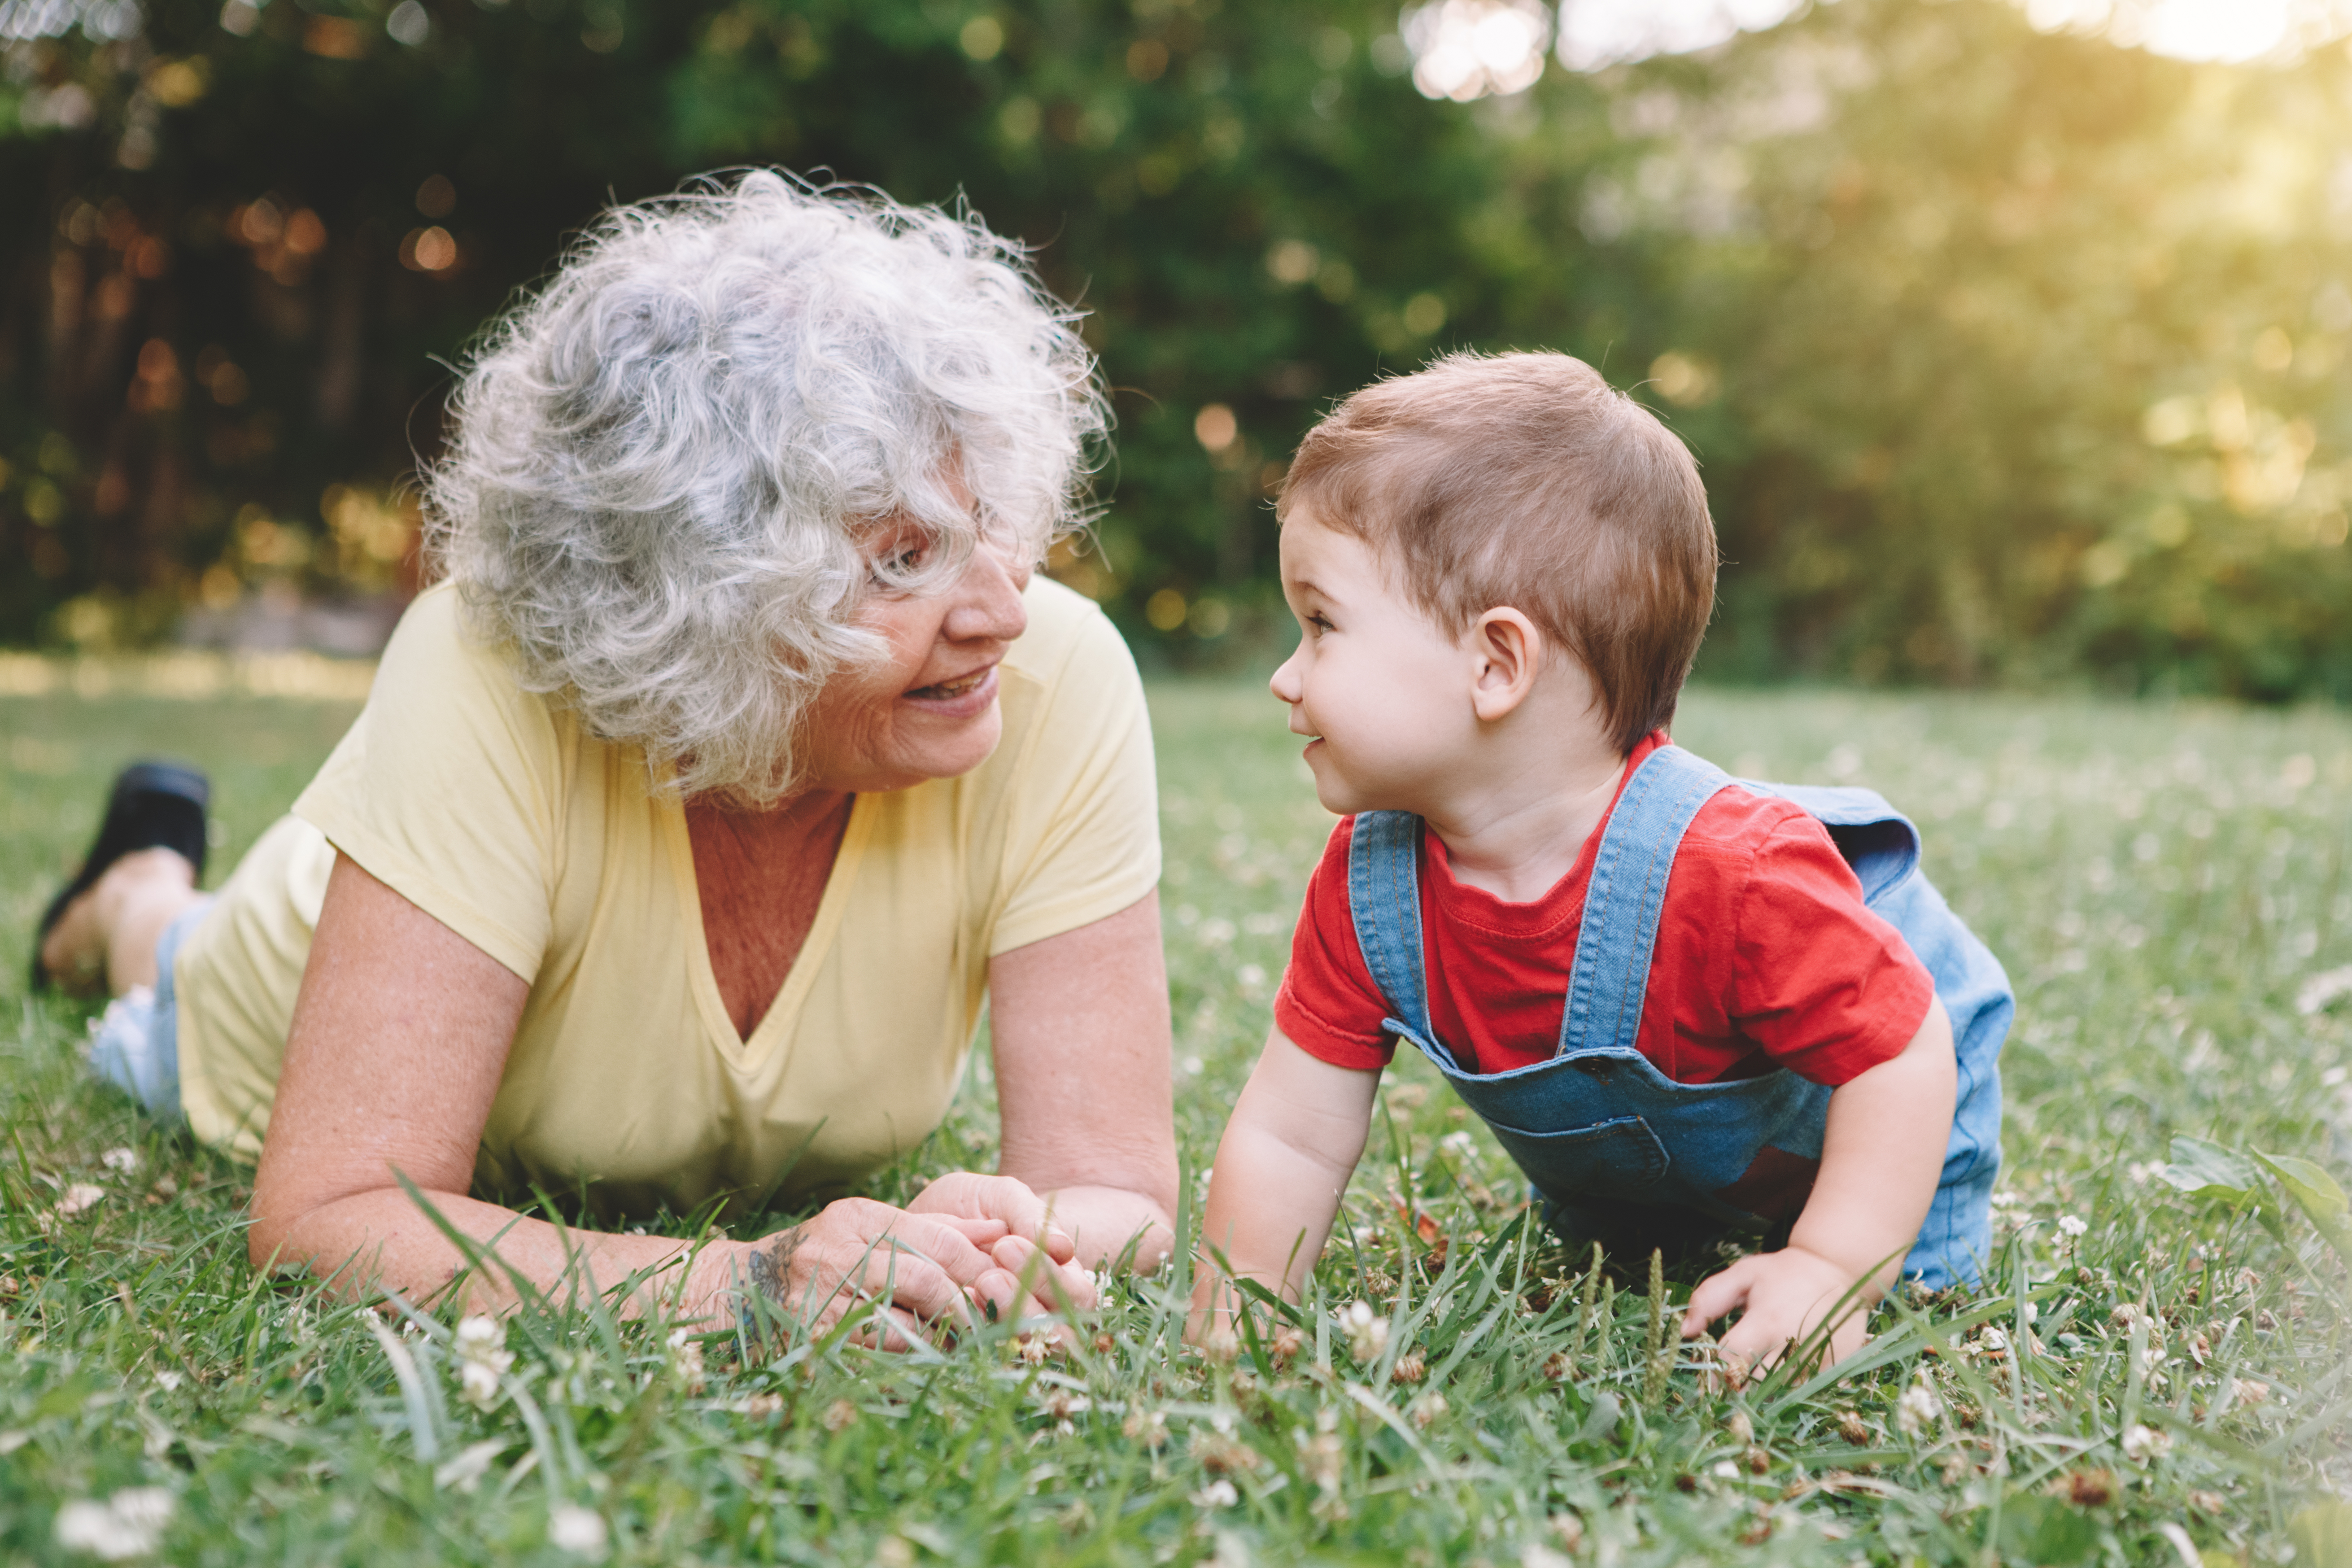 A grandmother and a grandchild laying in the grass | Source: Shutterstock